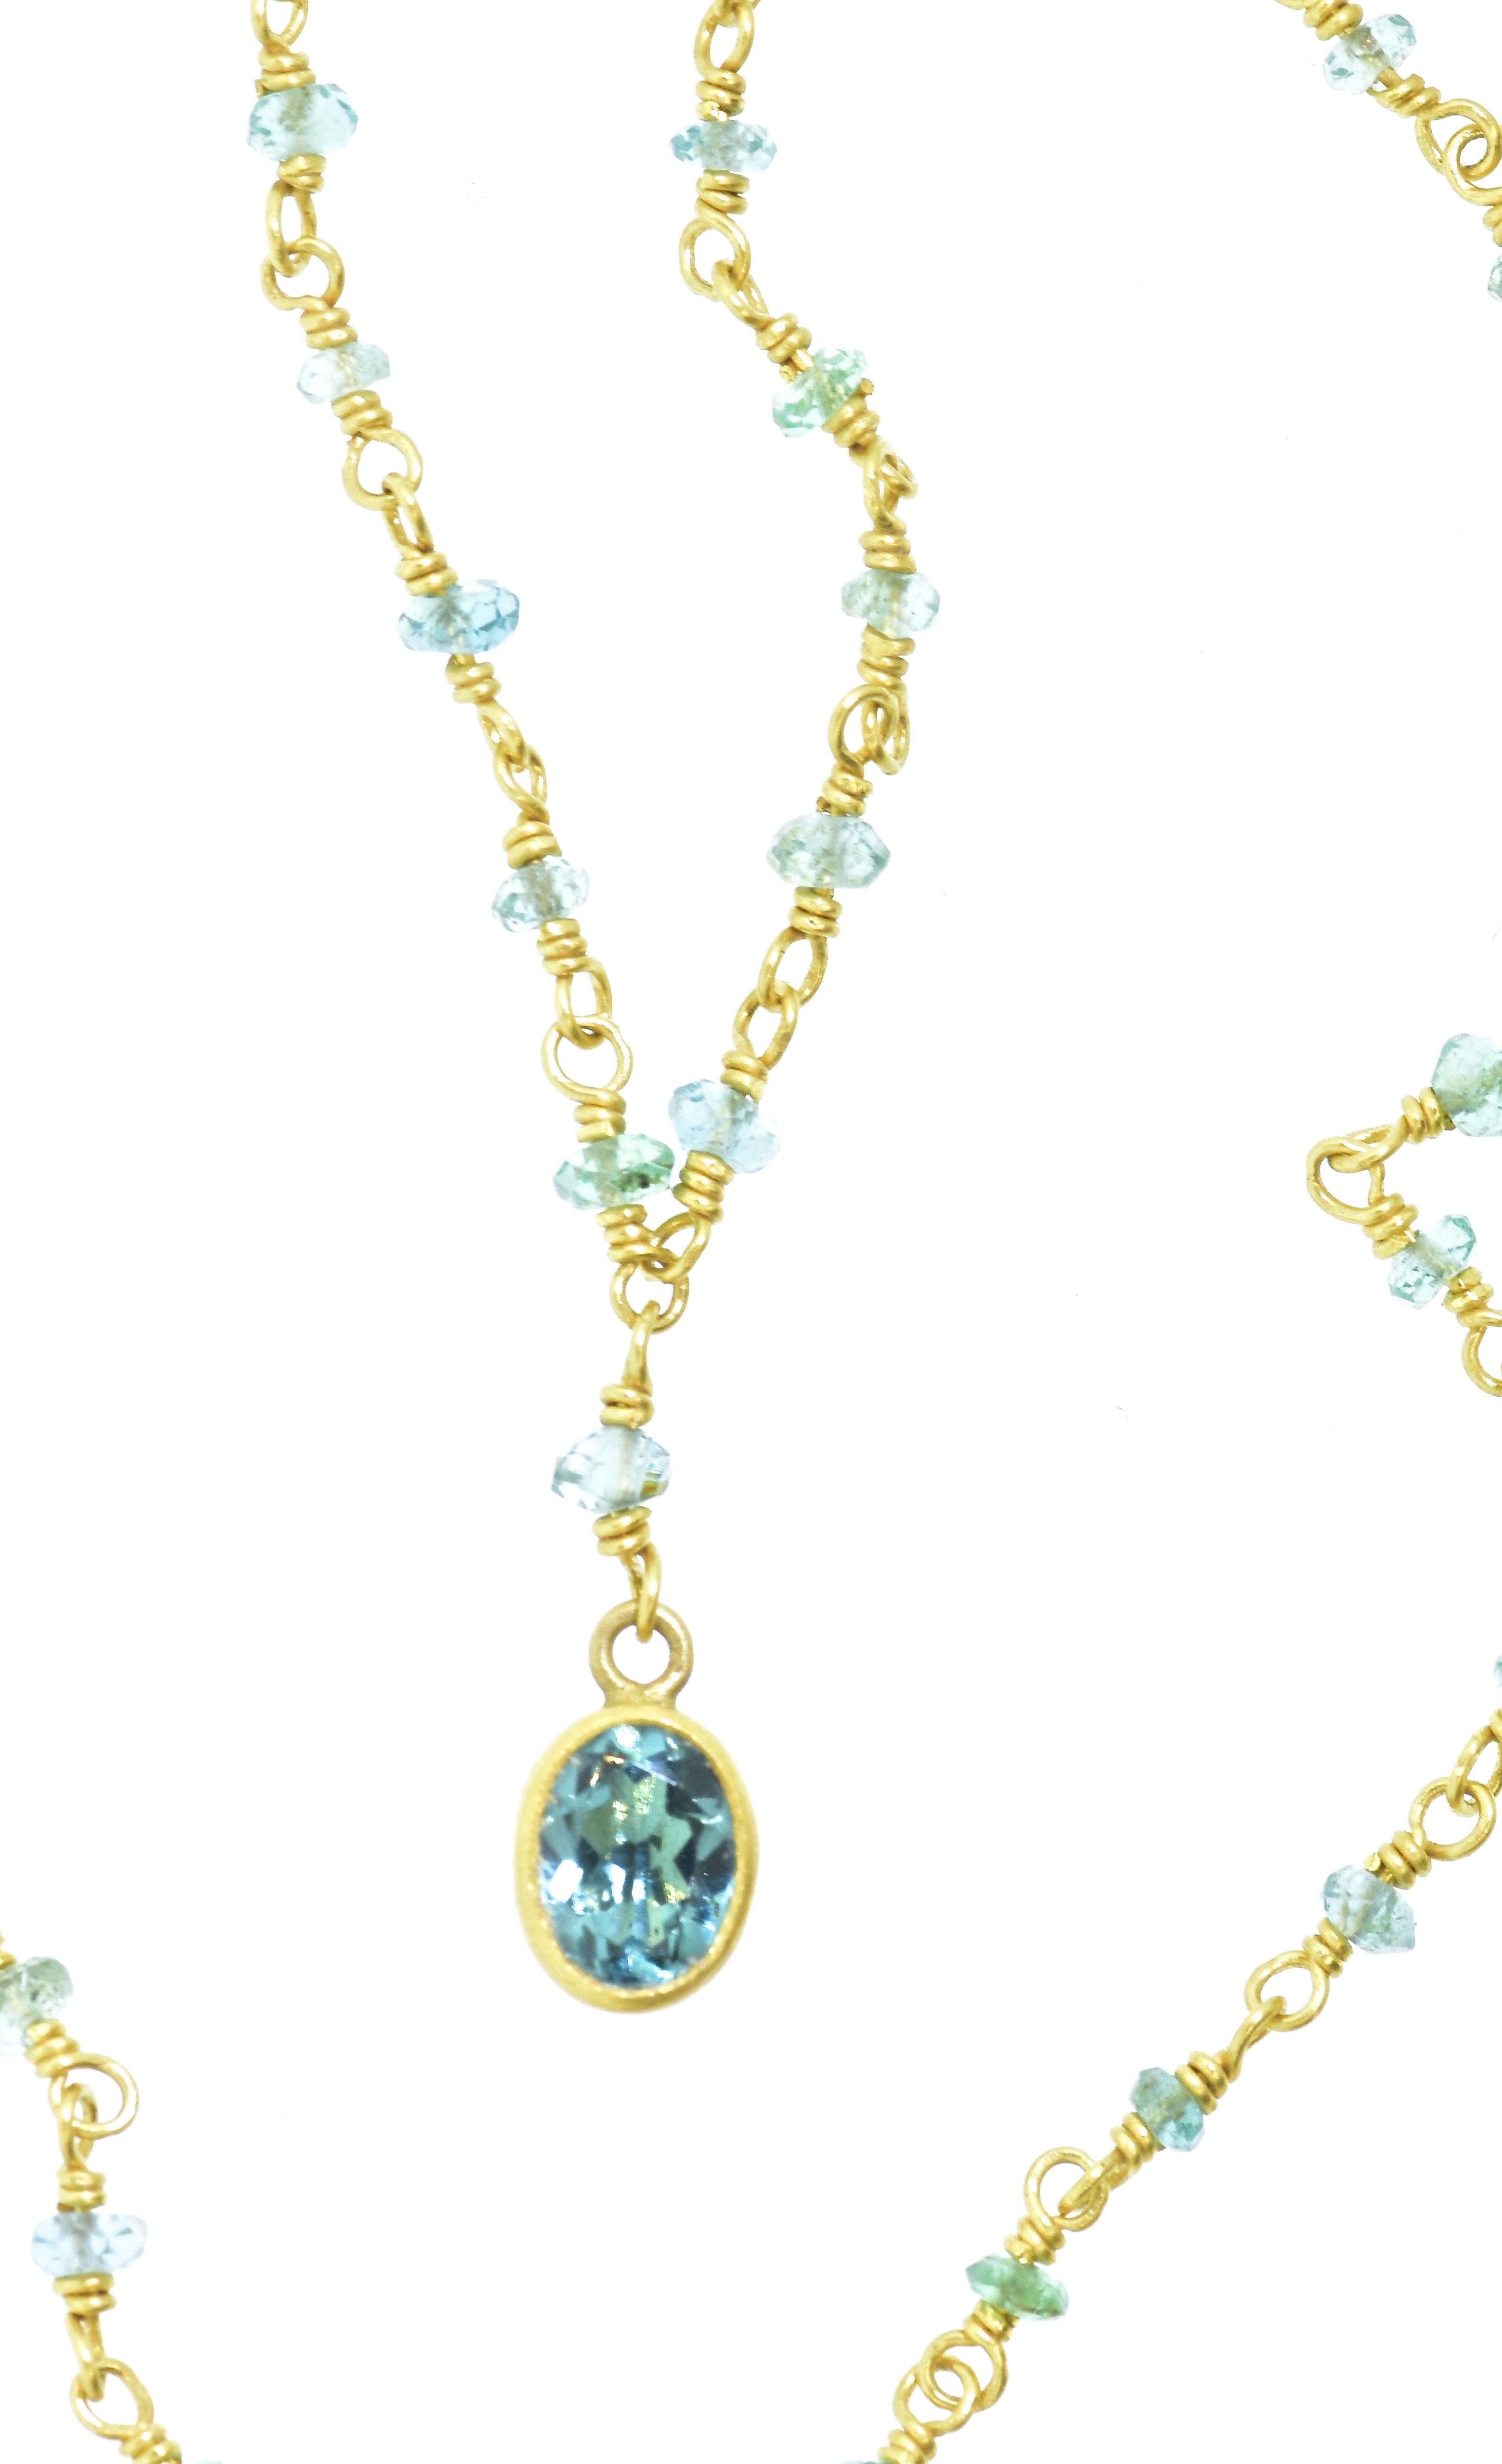 Oval Cut Aquamarine and Yellow Gold Necklace